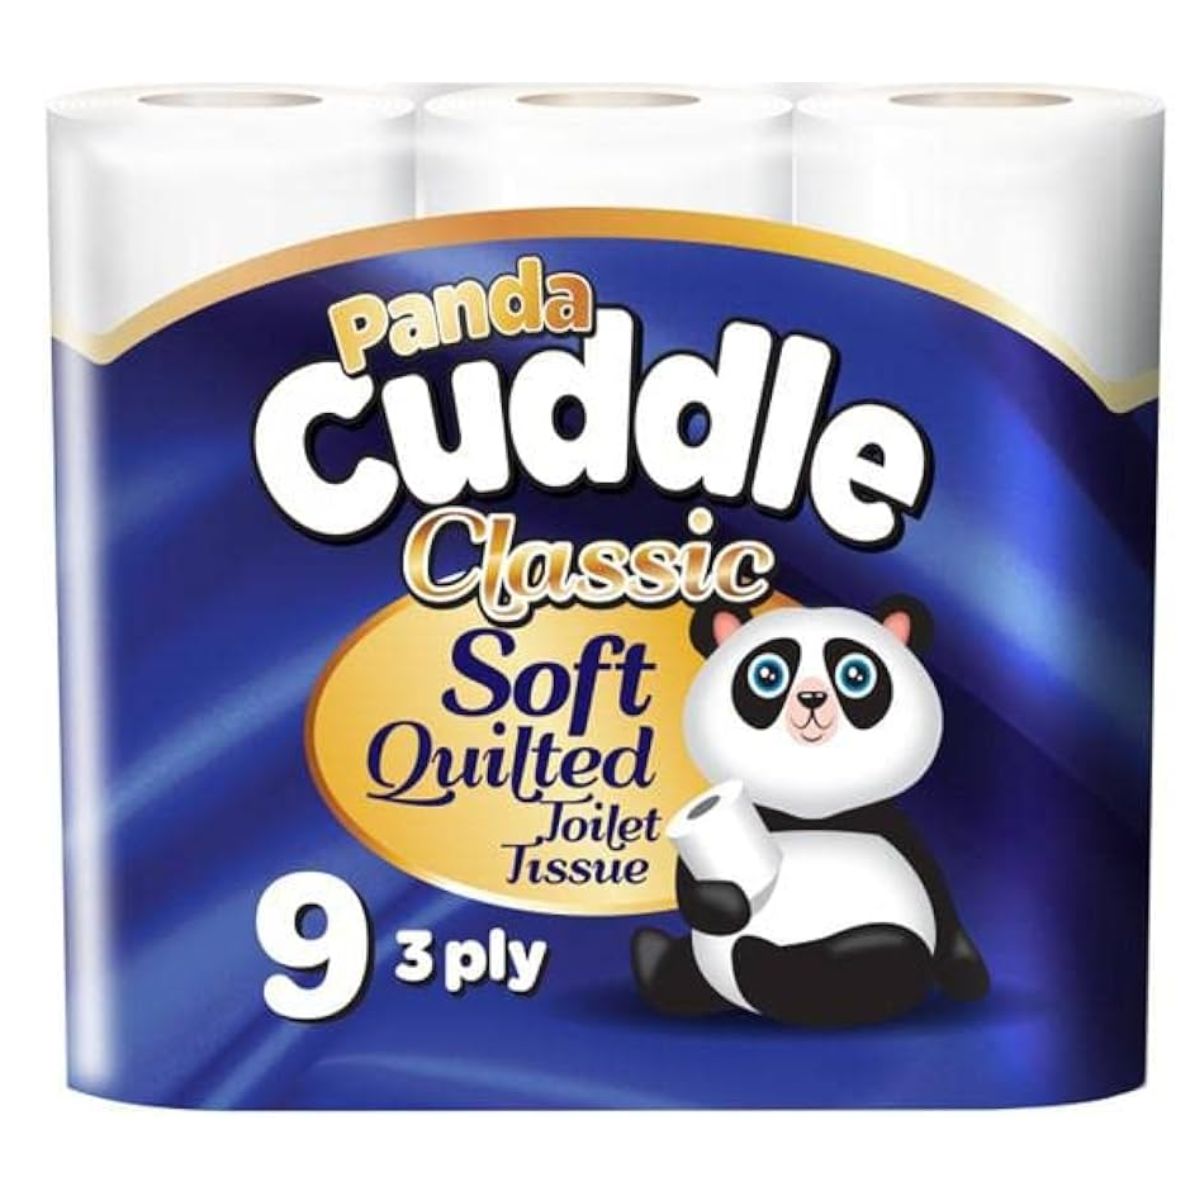 Sentence with Product Name: Panda - Cuddle Classic Soft Quilted Toilet Rolls - 9 Pack.